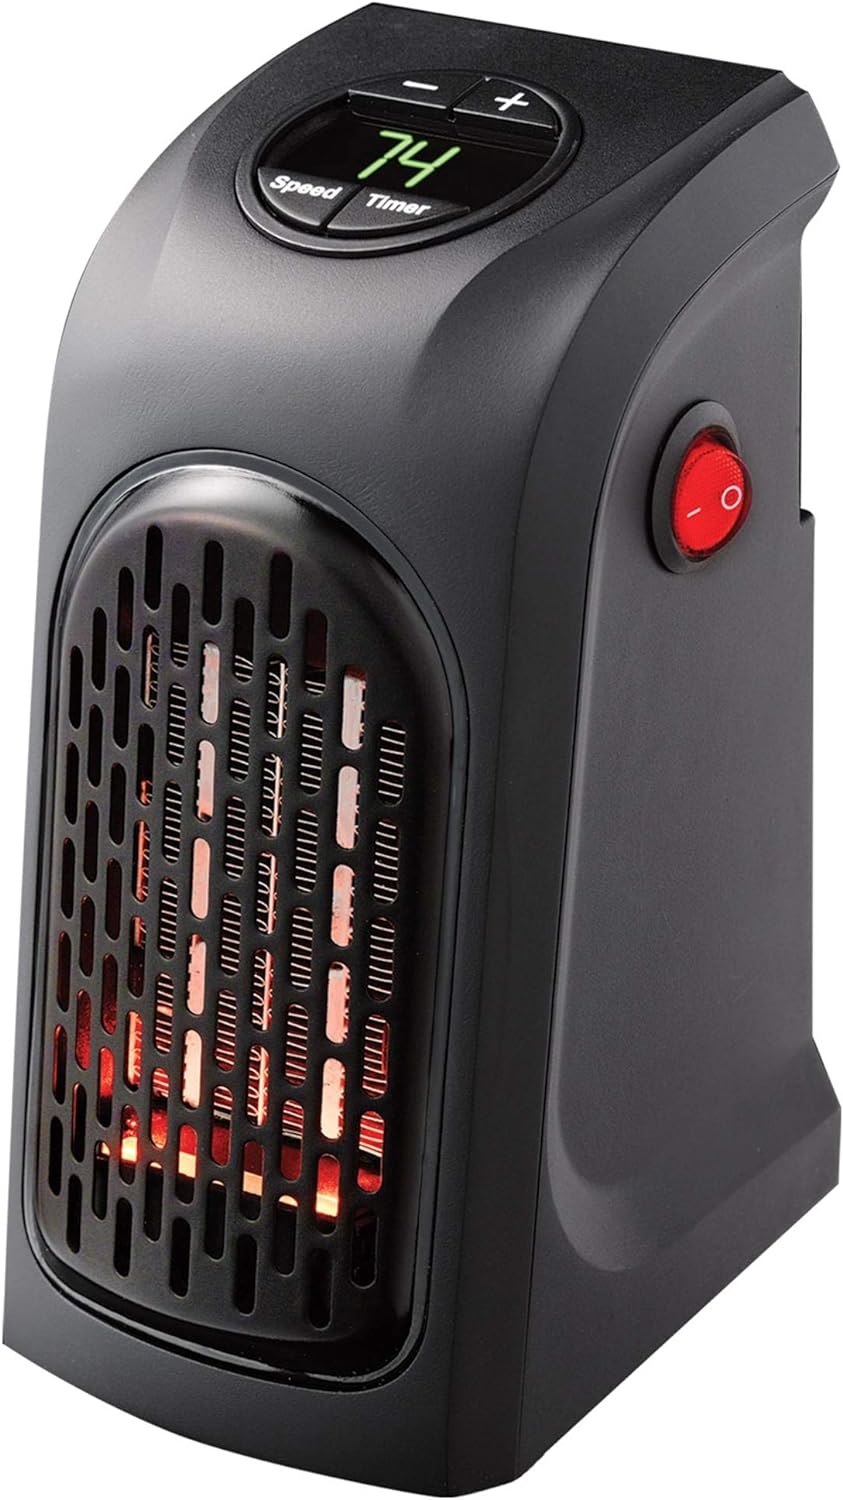 Ontel Handy Heater | Plug-in Personal Heater | Compact Design | Quick and Easy Heat | Digital Display | Great for Travel | On/Off with Timer